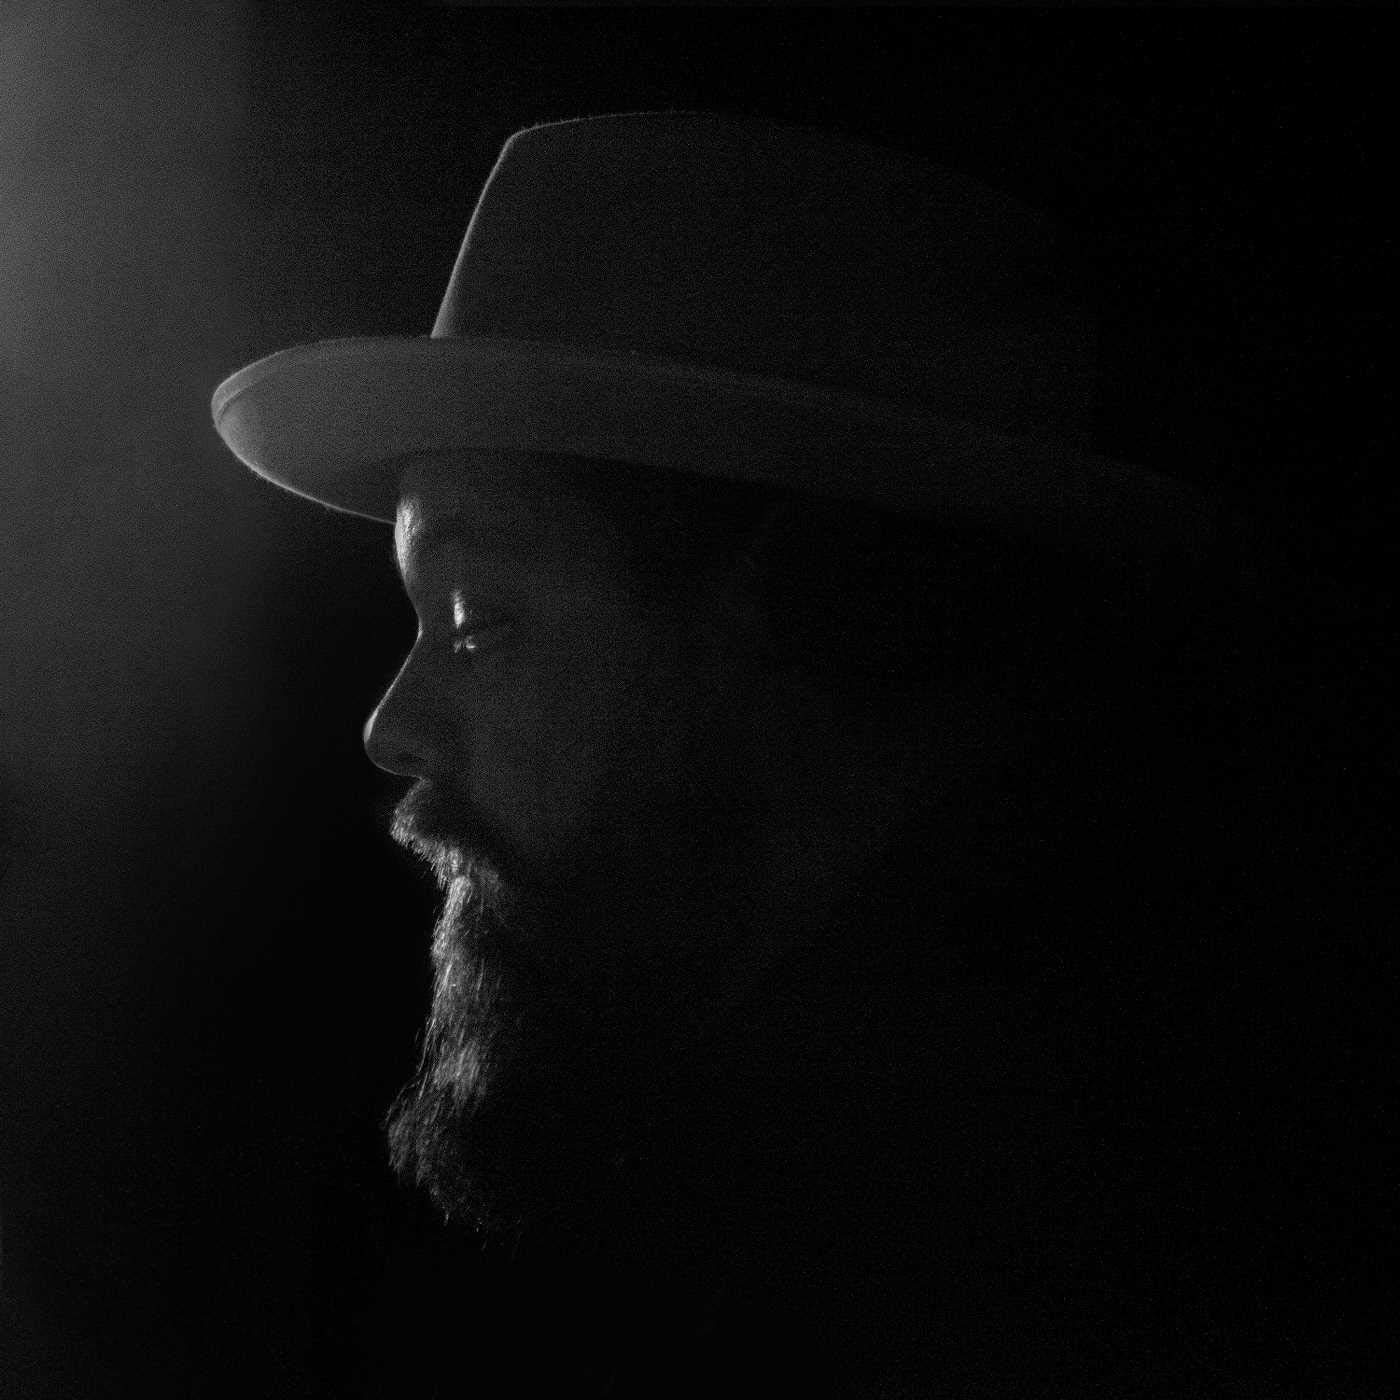 Nathaniel-Rateliff-and-the-Night-Sweats-Tearing-At-the-Seams-vinly-record-album-front